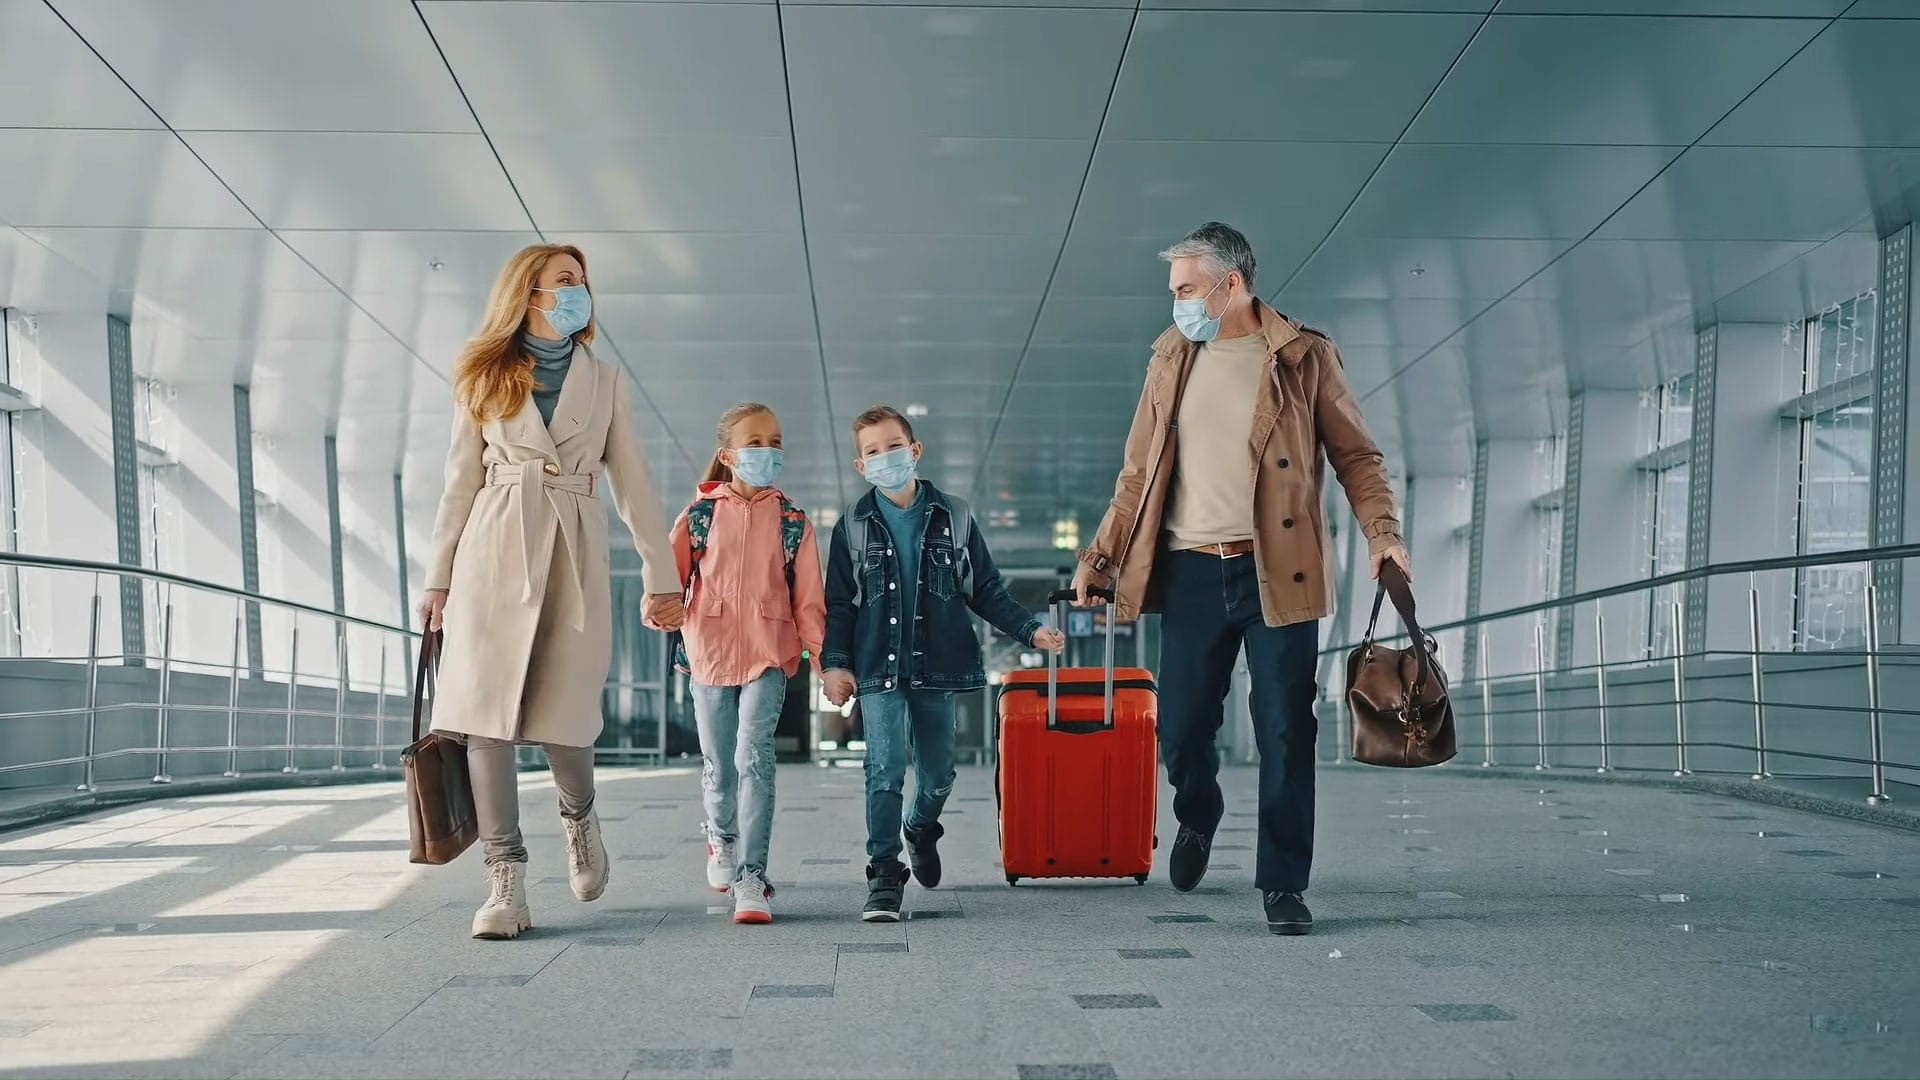 A mother and father with their two young children walk through an airport